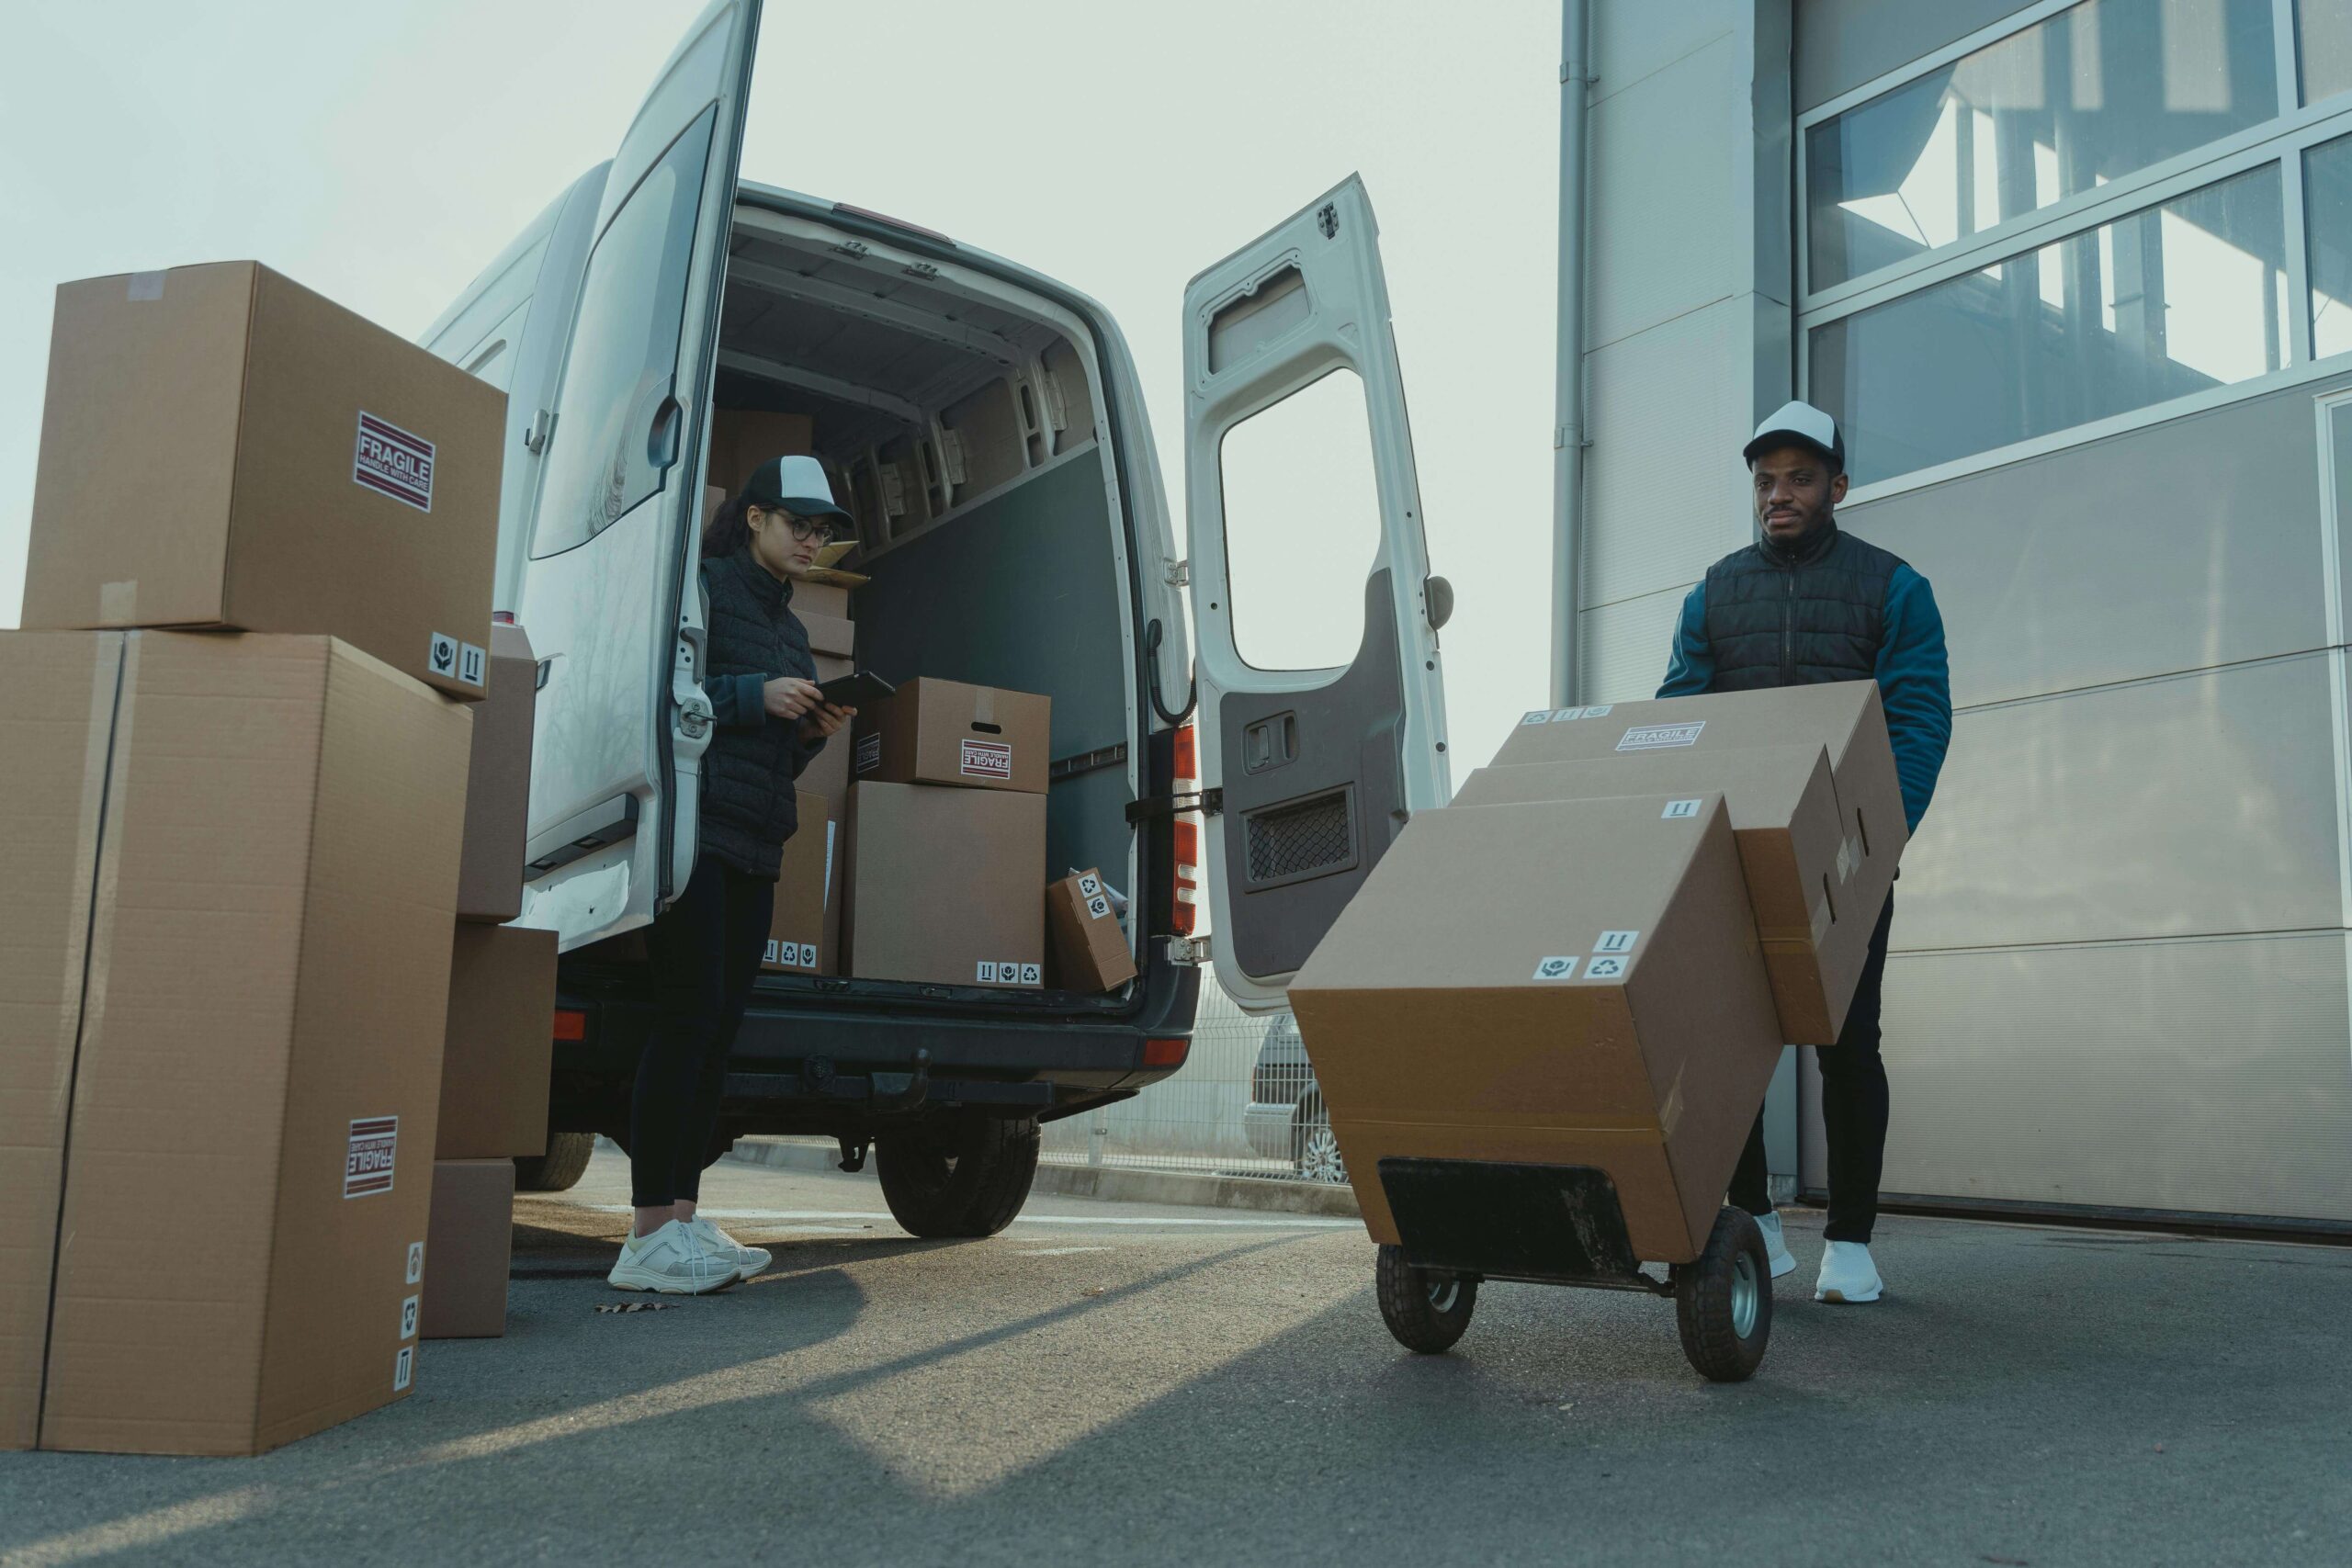 Professional movers loading boxes into a van for an interstate relocation service